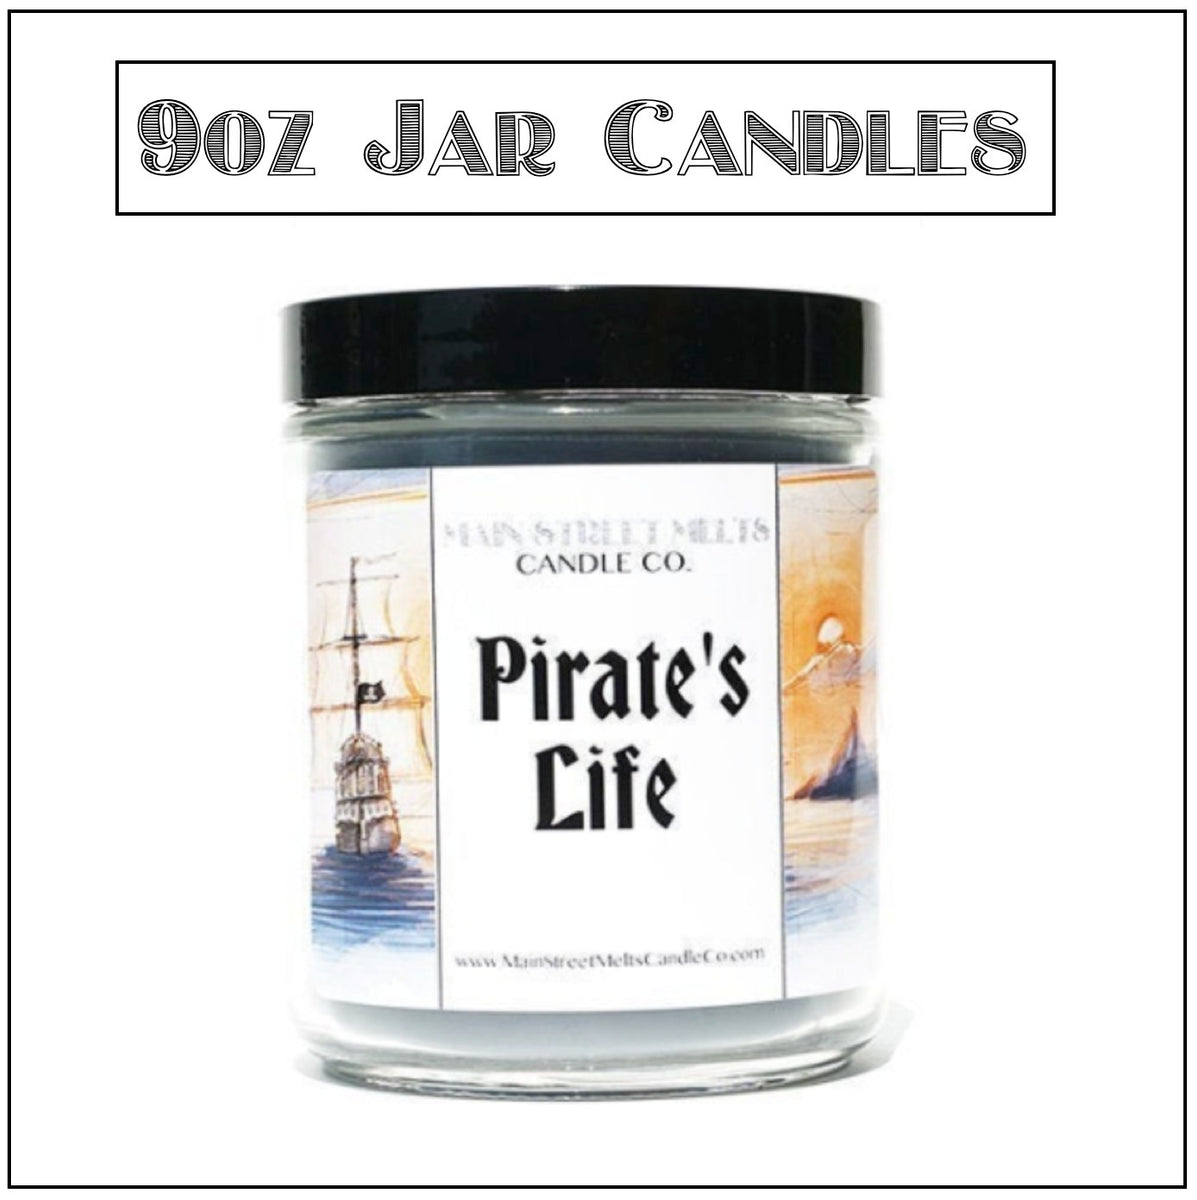 Fragrance Oils – Tagged Disney Scents – Main Street Melts Candle Co.